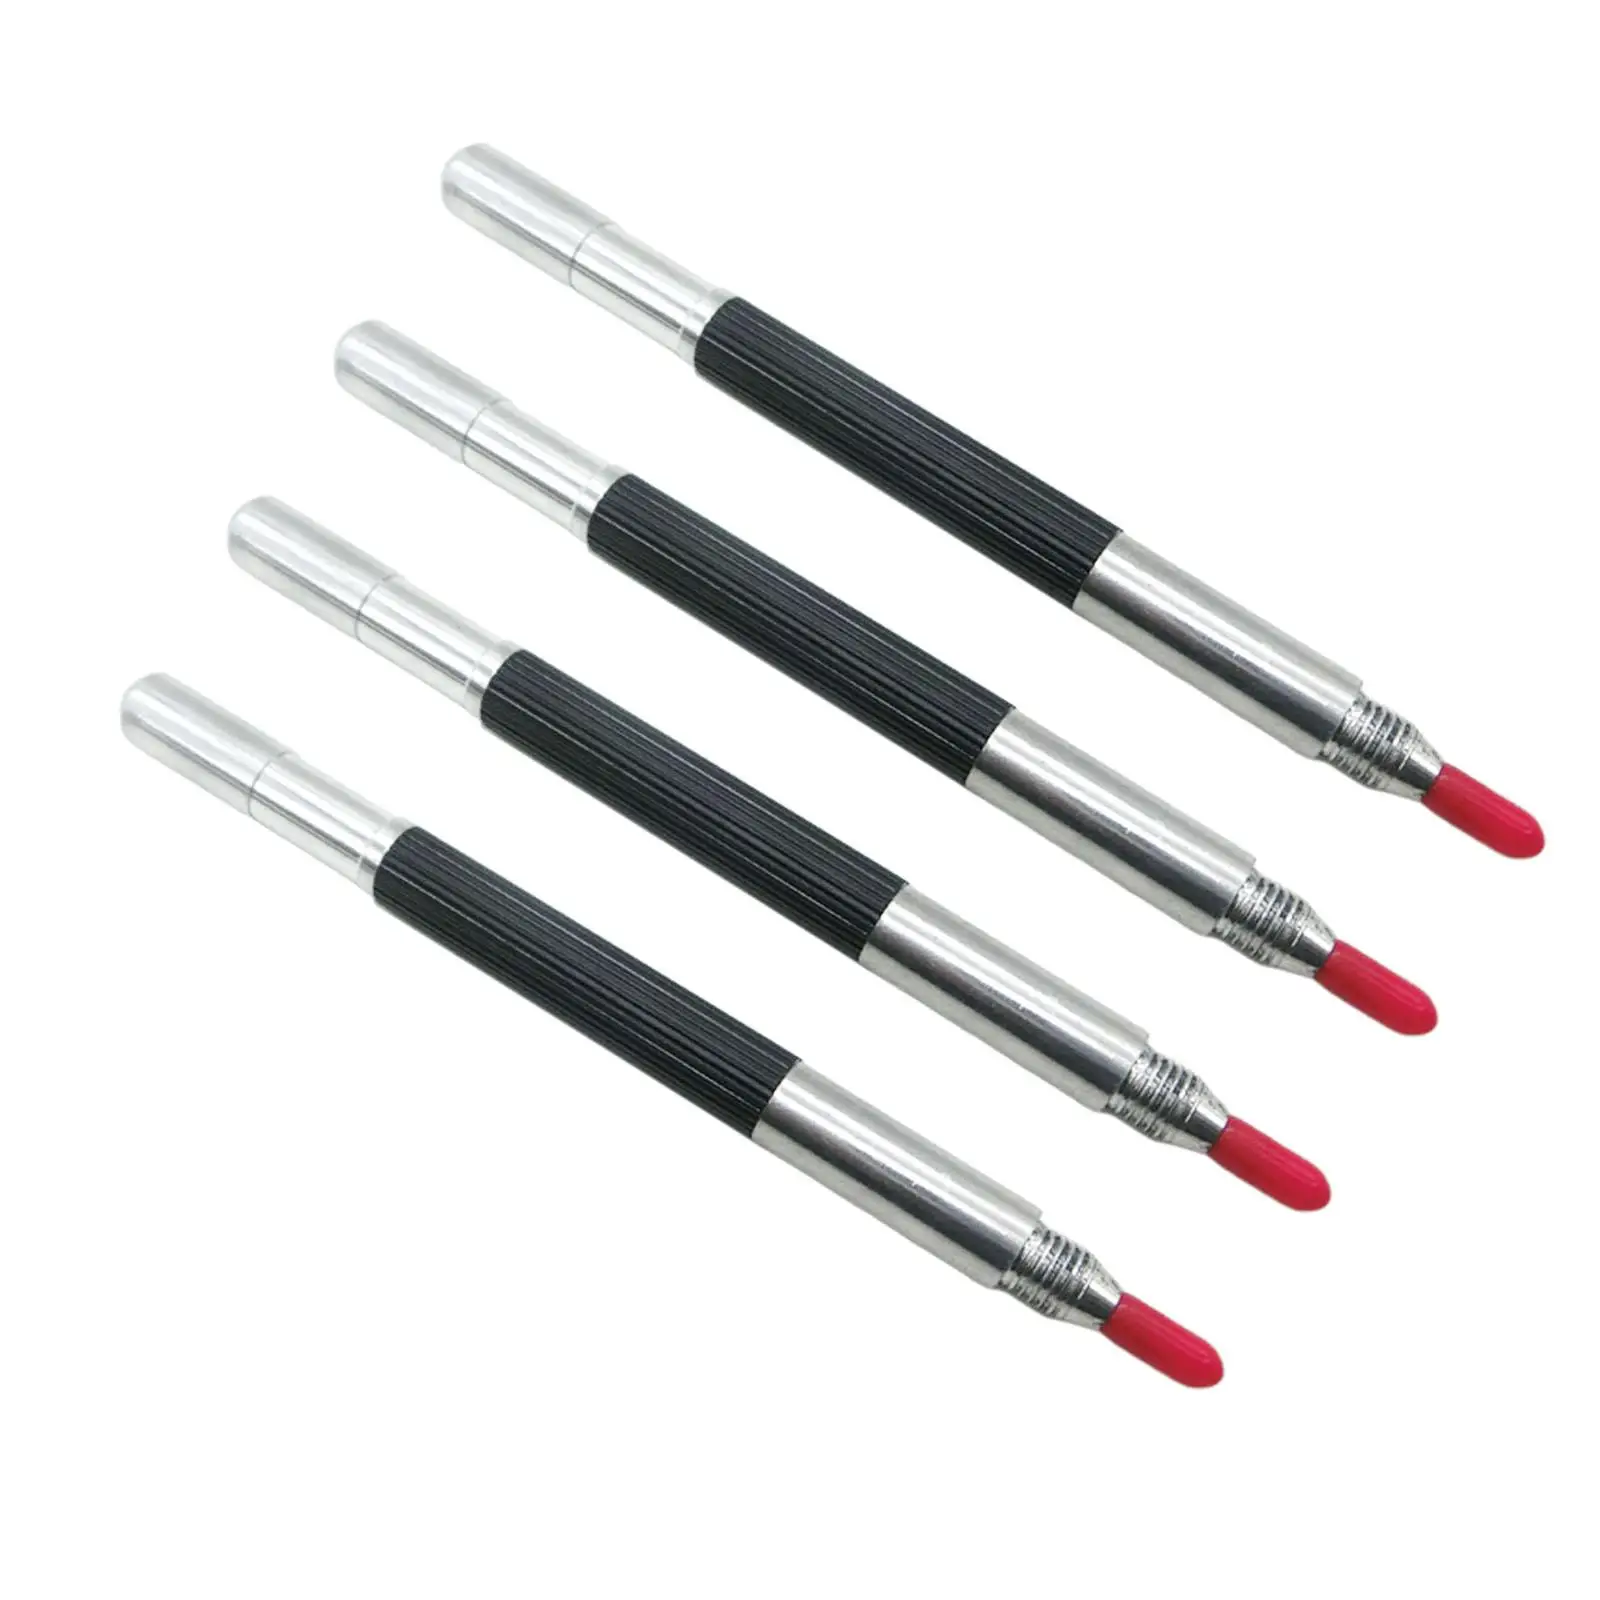 4 Pieces Tungsten Carbide Tip Scriber Pens Double Ended Cutting Multi Purpose